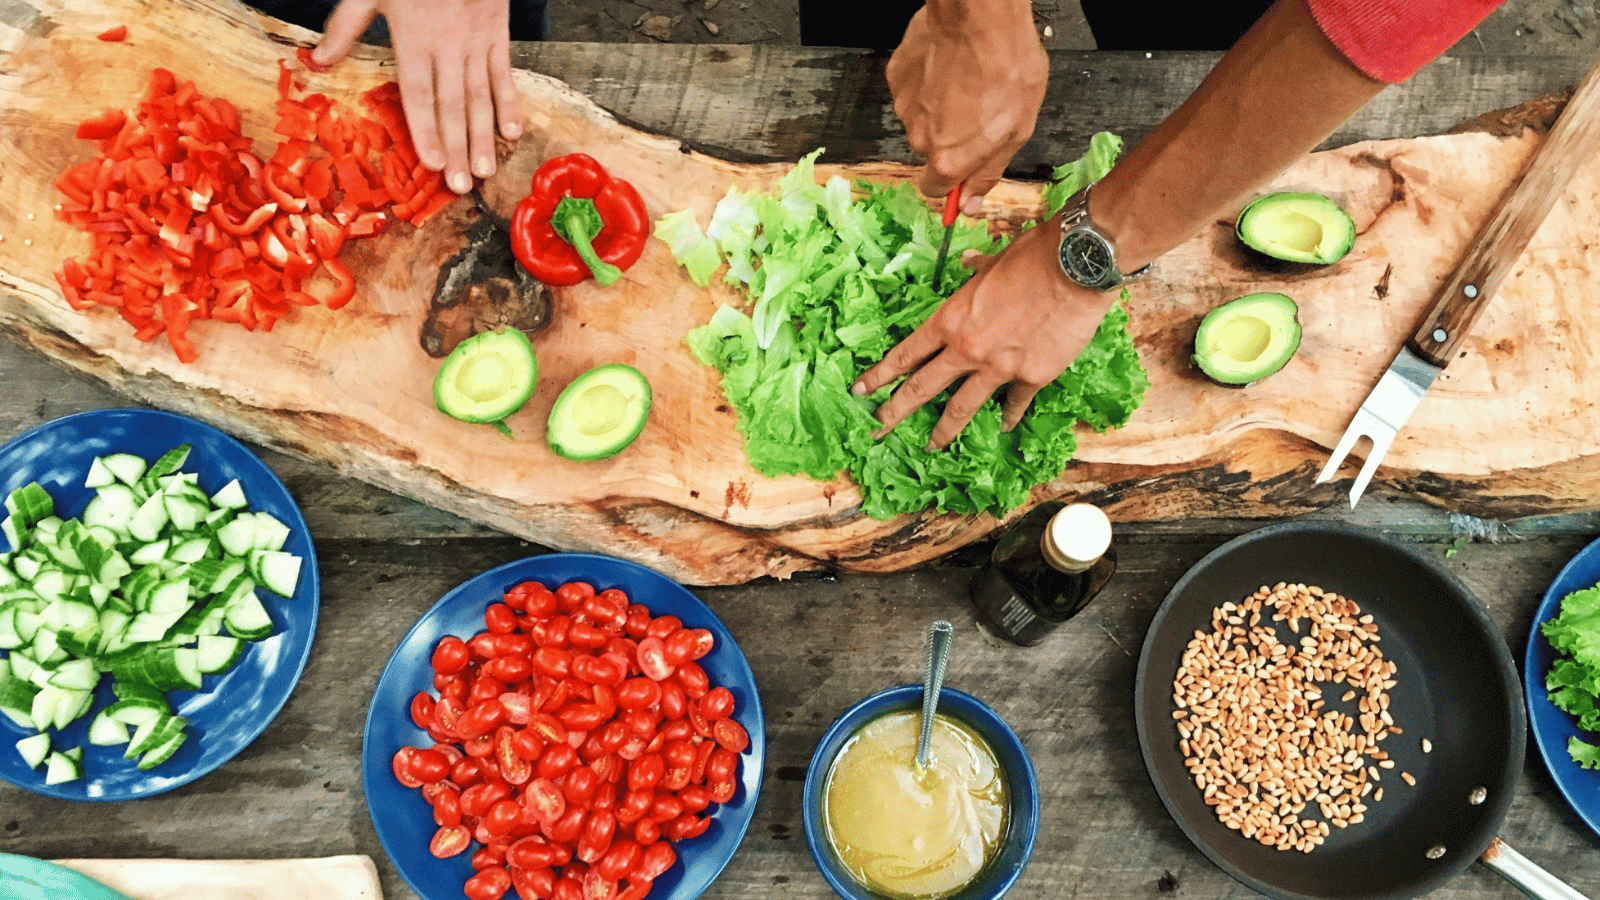 A table of raw ingredients with two people preparing a meal